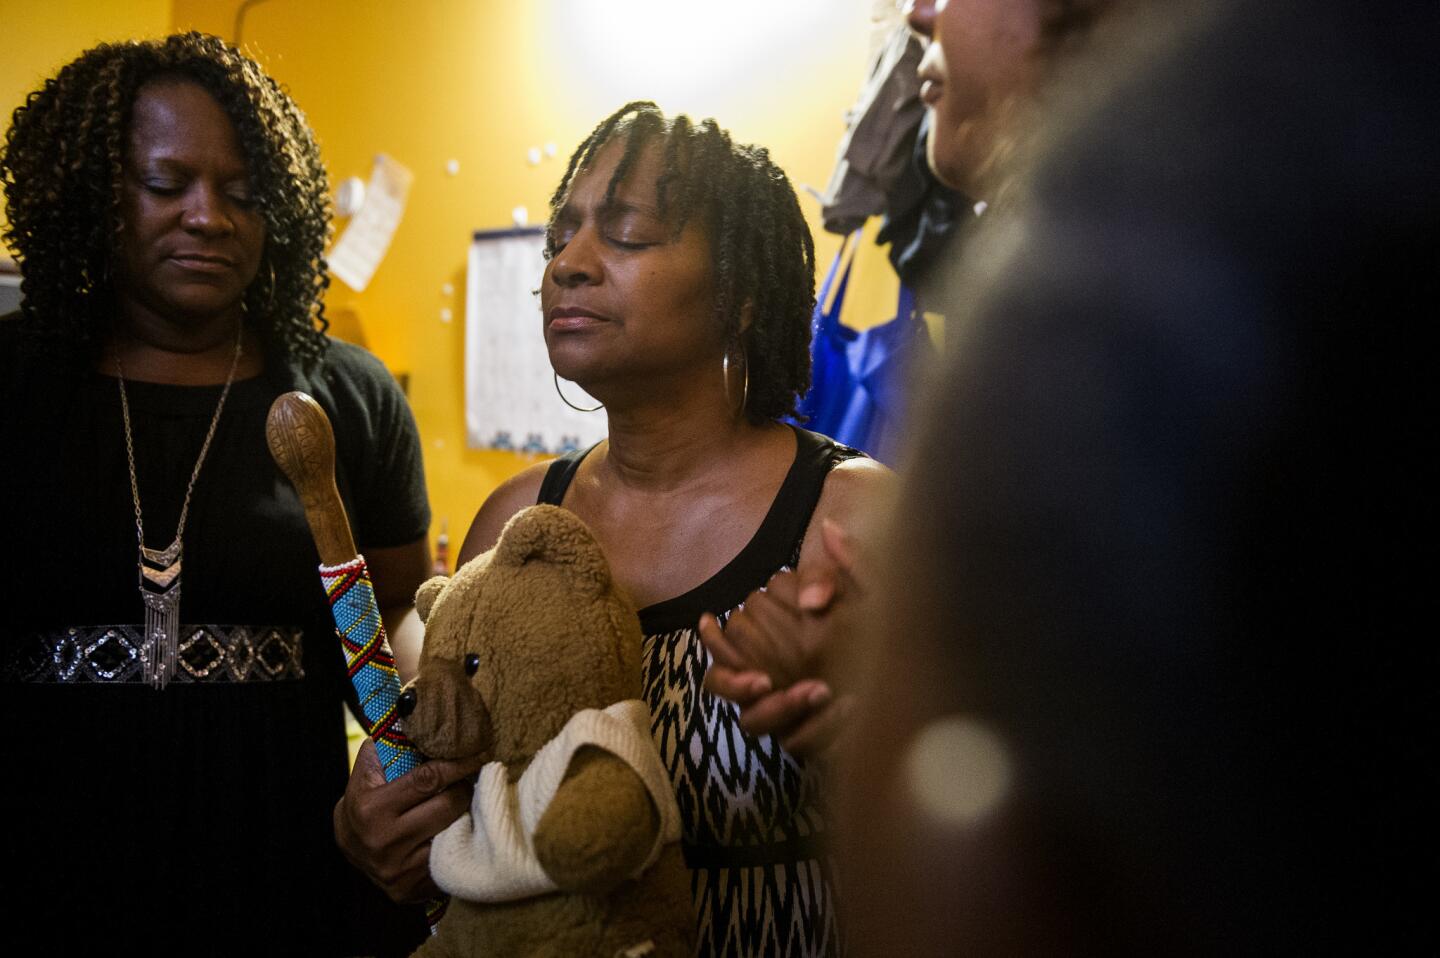 Najiyyah Avery, center, prays for her son, Jai "Jerry" Williams, while holding his childhood teddy bear at the Block off Biltmore in Asheville, N.C., on July 12, the day Williams would have turned 36. Williams was fatally shot by police at the city's Deaverview Apartments 10 days earlier.